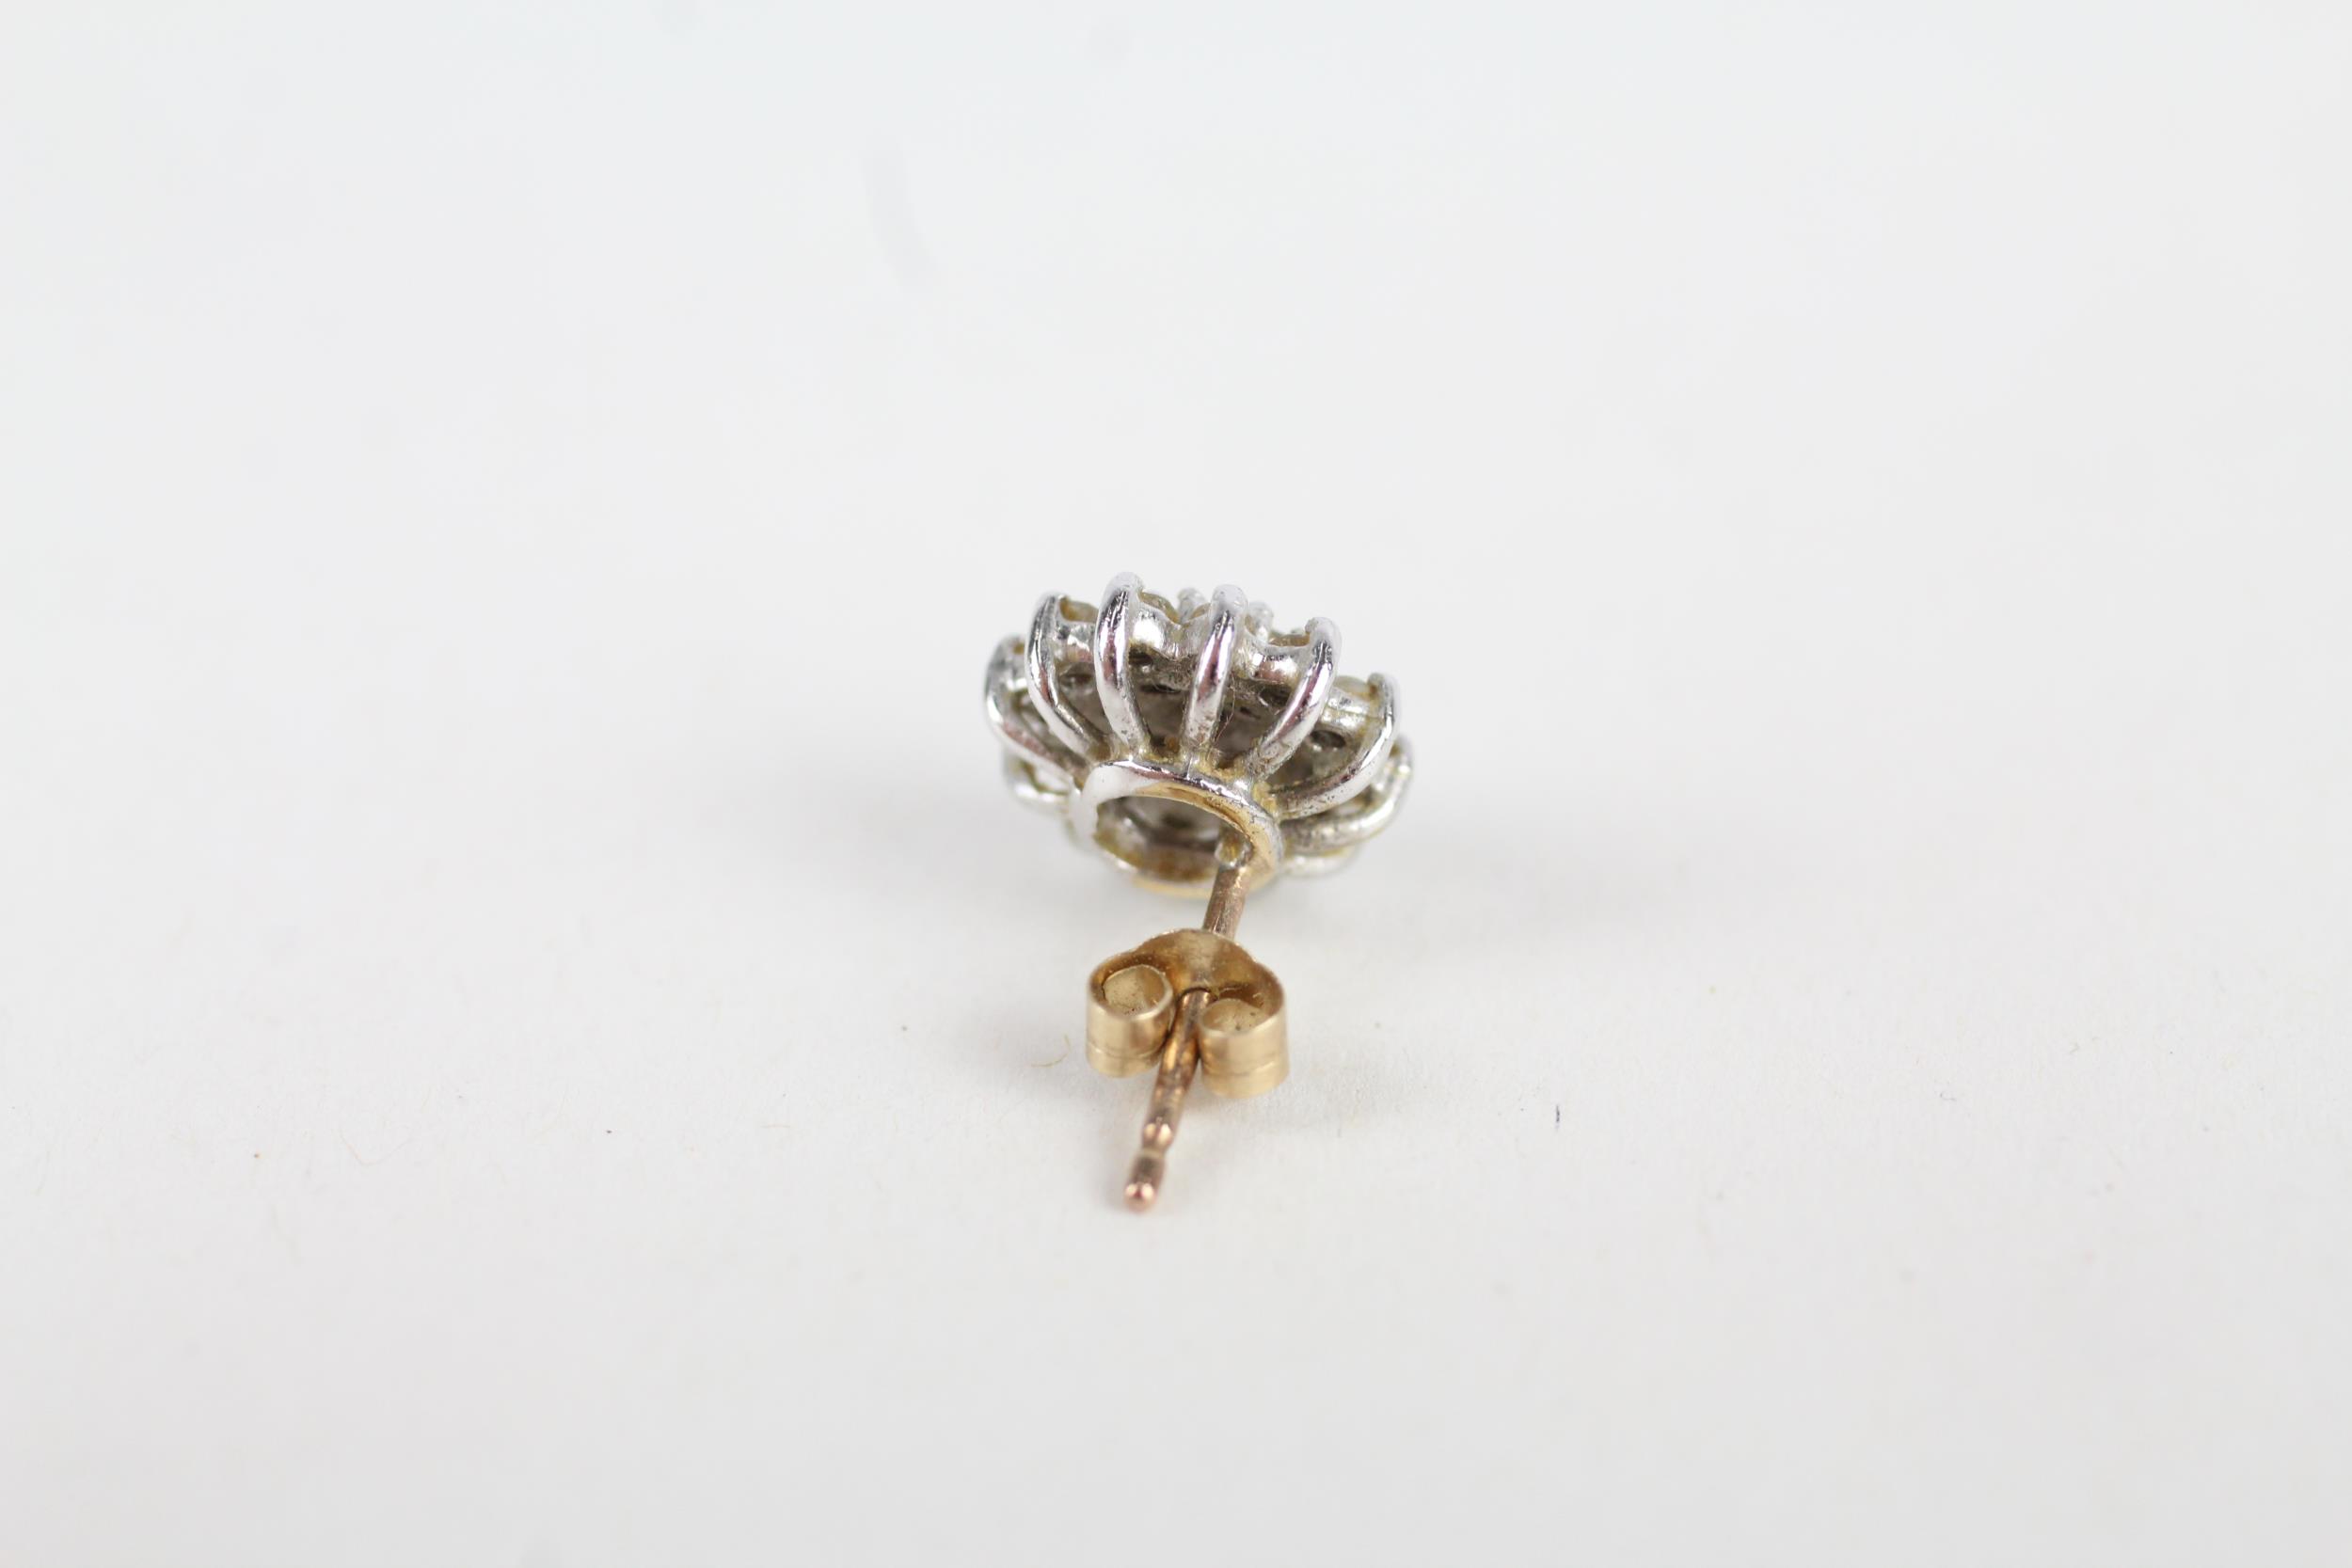 9ct gold diamond cluster stud earrings ( as seen) 2.3 g - Image 4 of 4